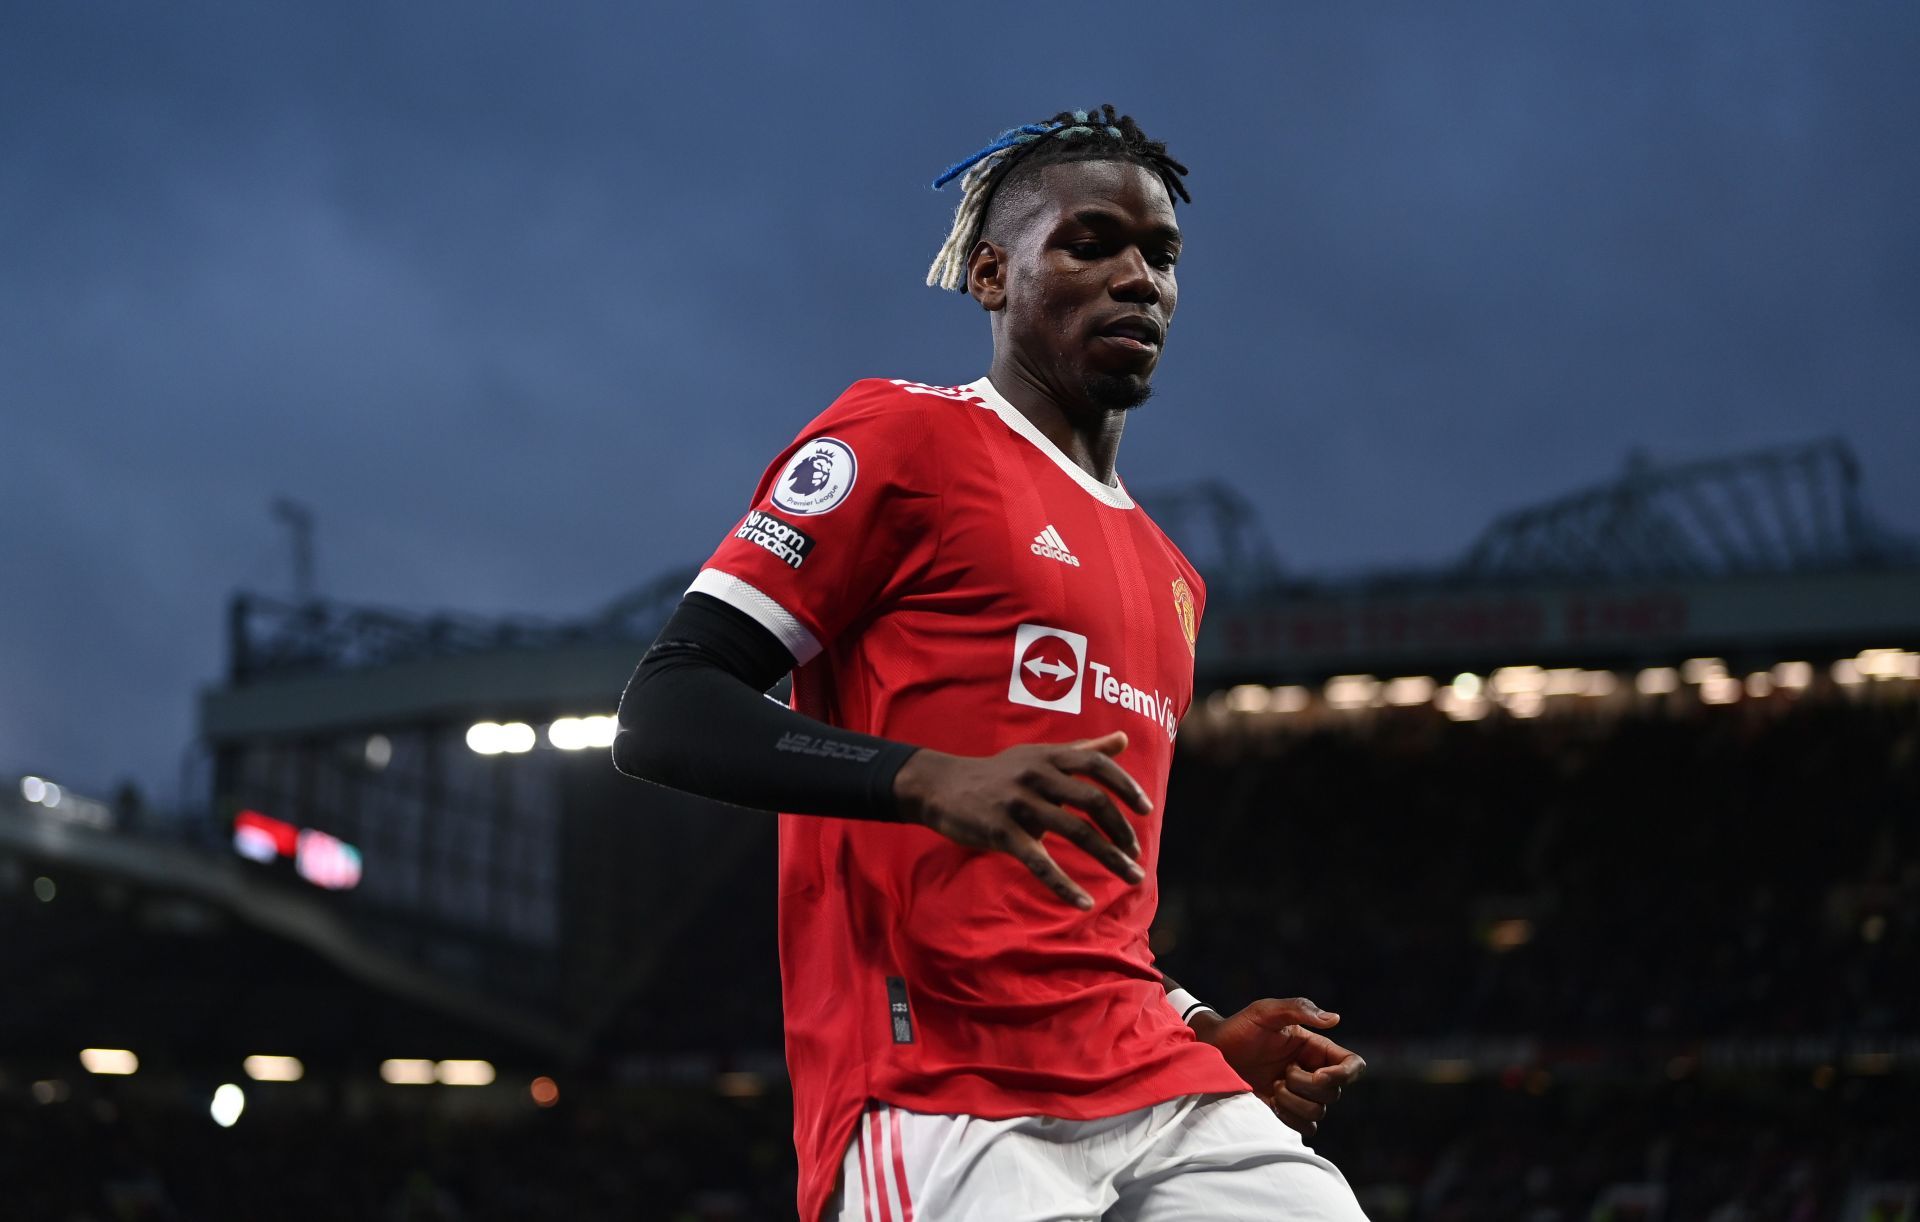 PSG have reignited their interest in Paul Pogba.